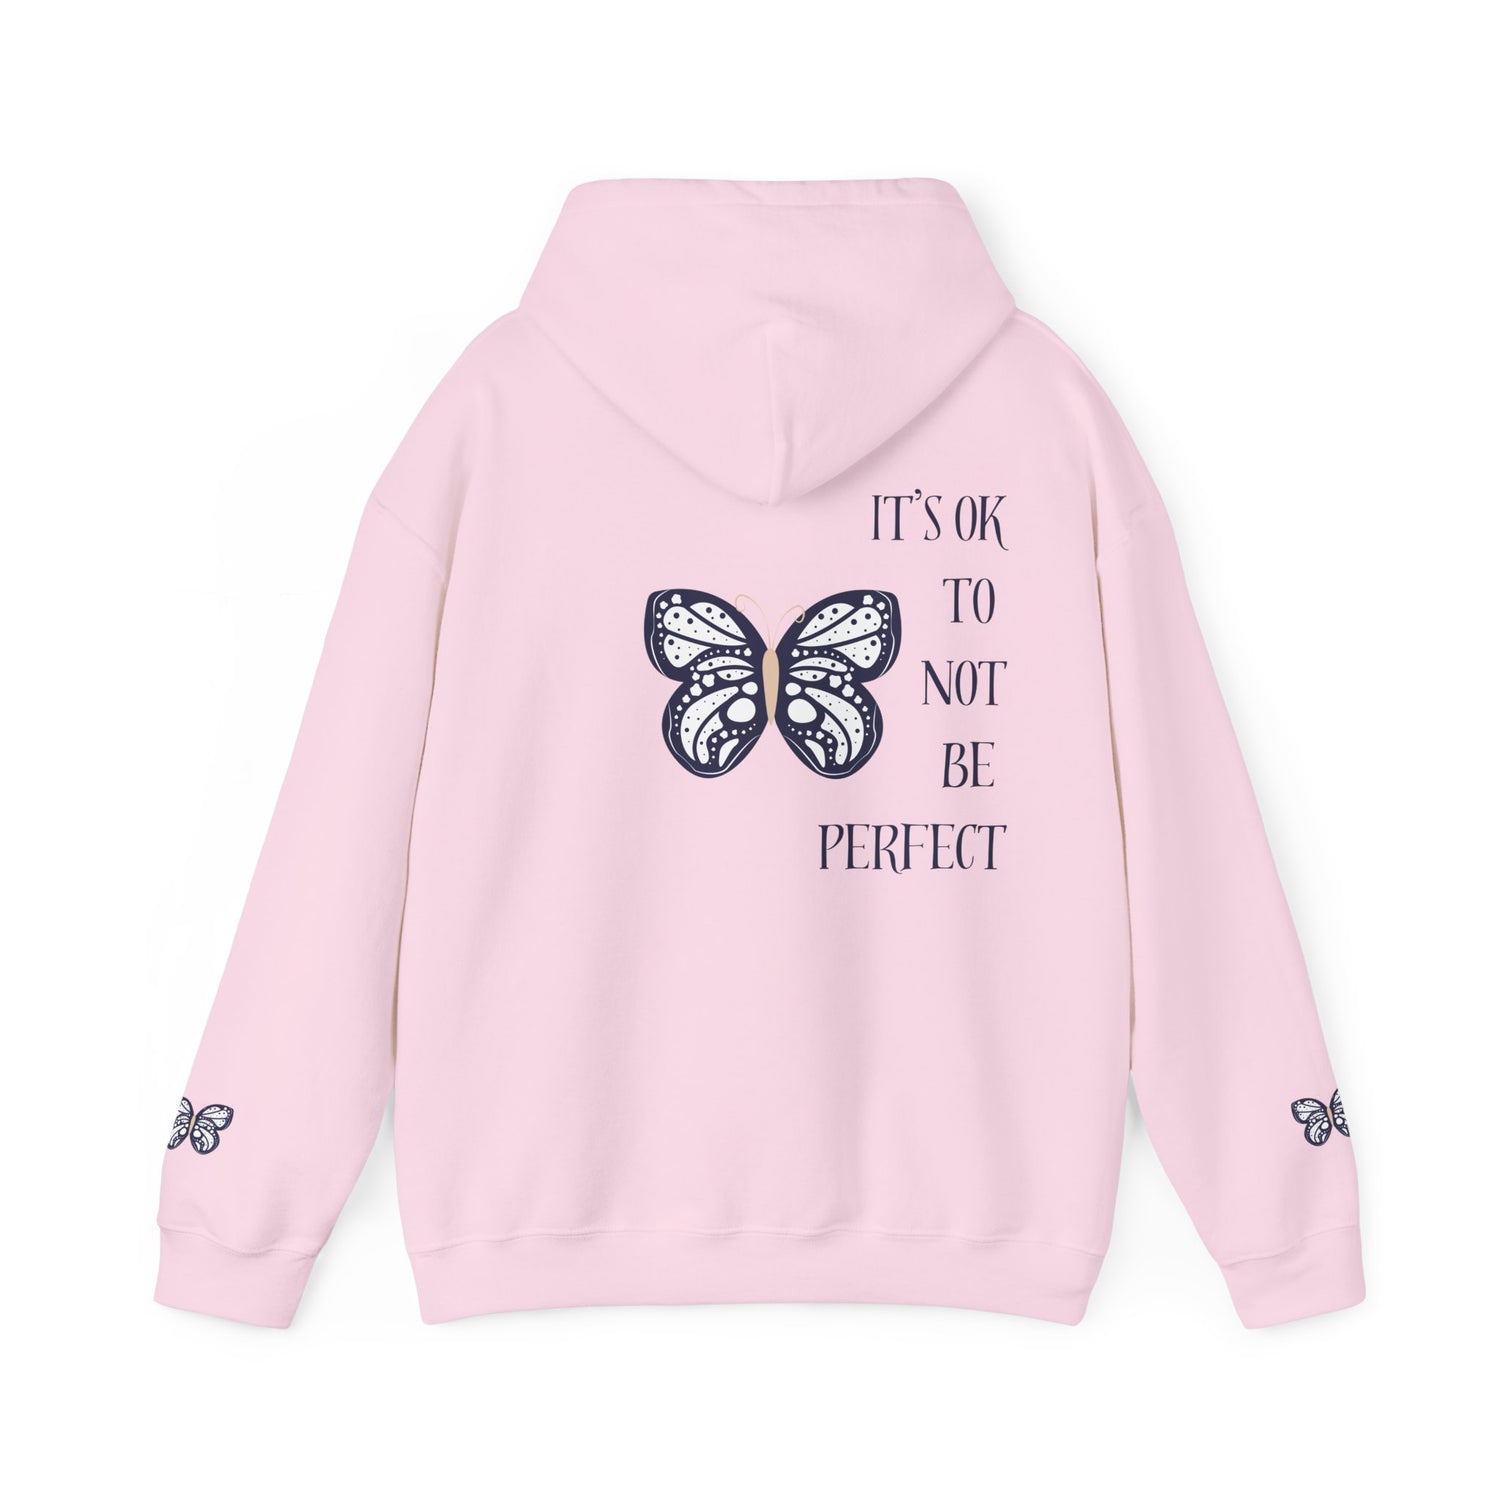 It’s ok to not be perfect - Hooded Sweatshirt